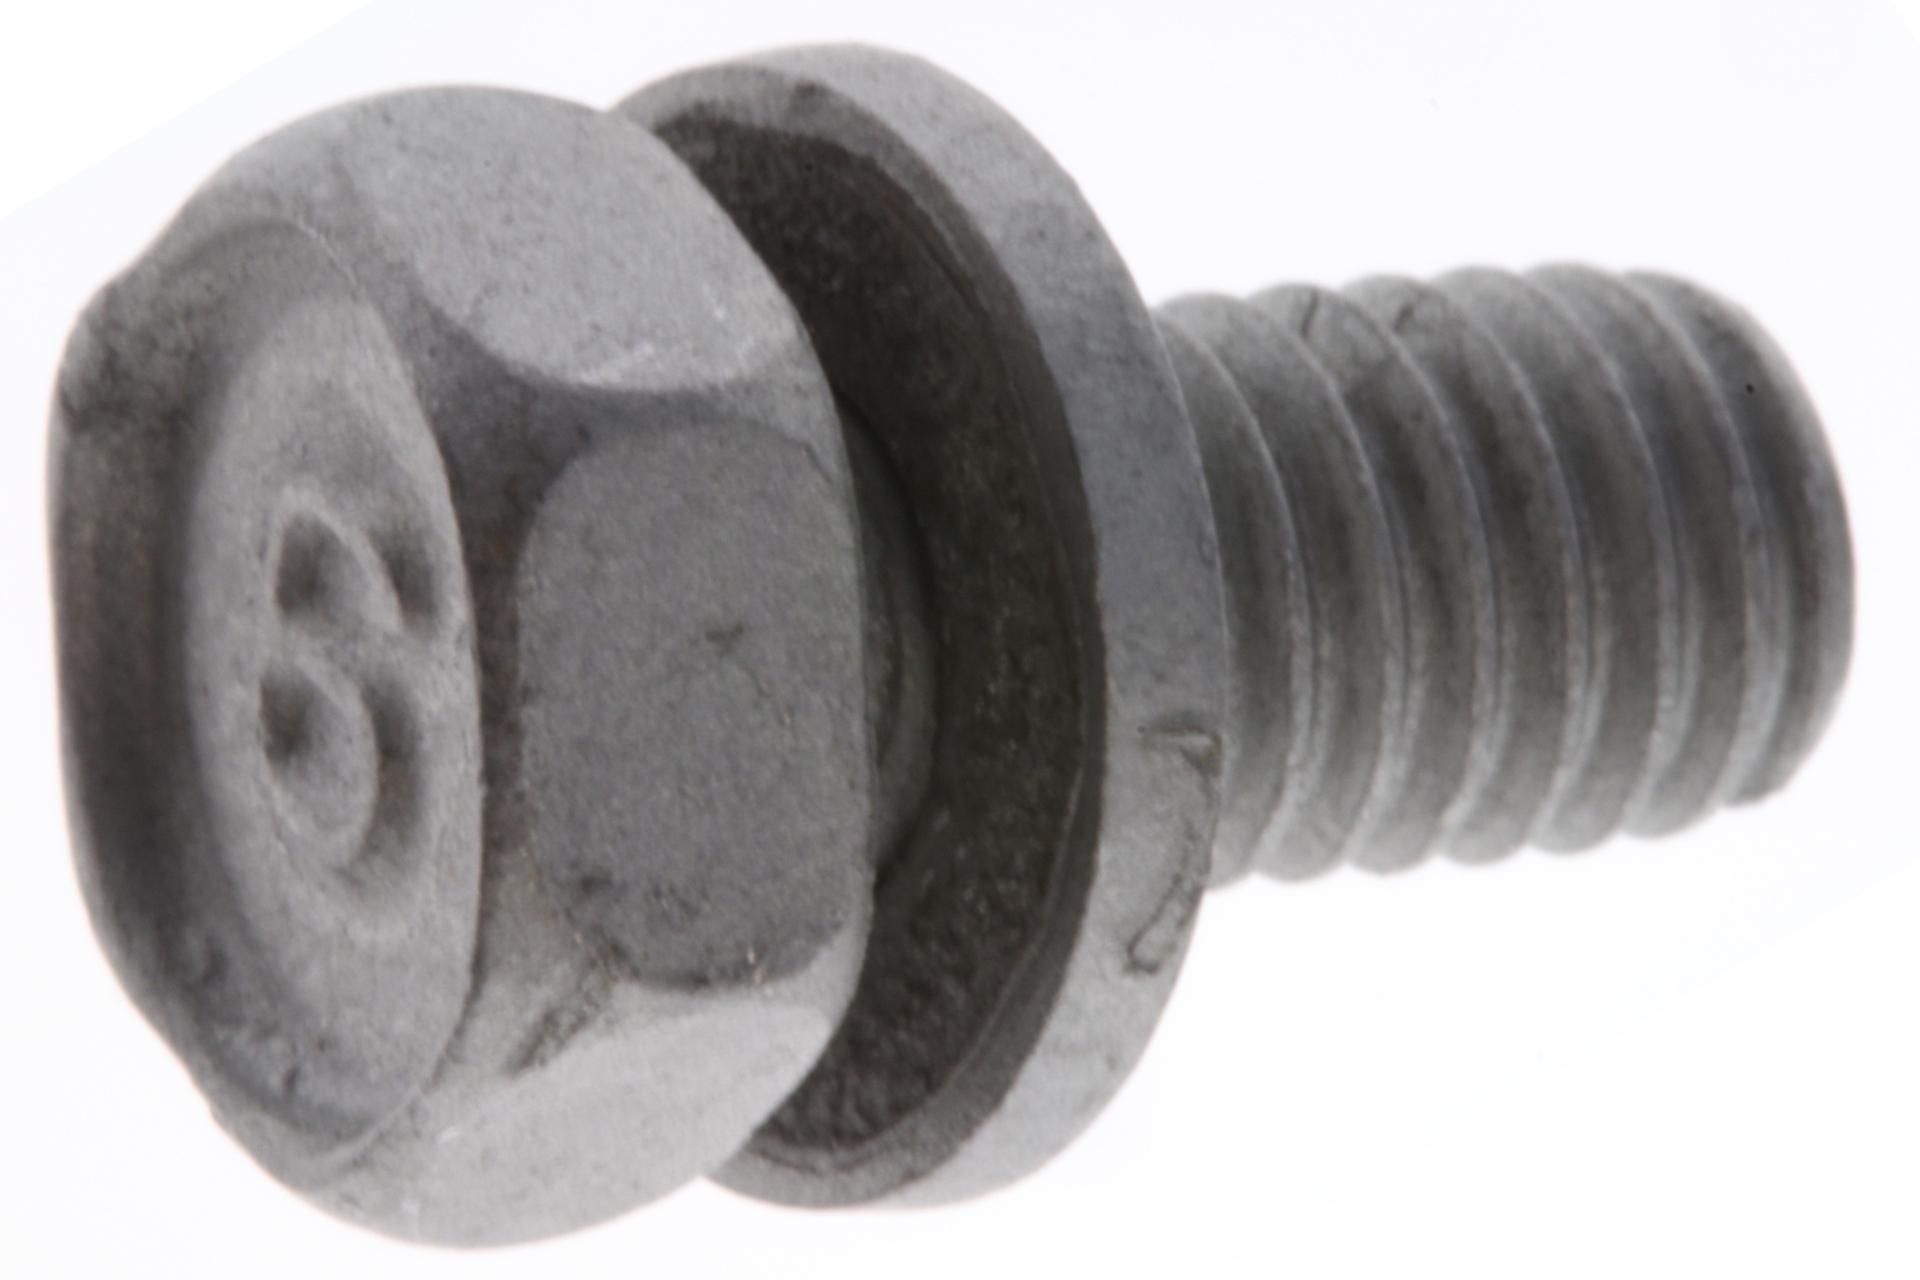 97595-06512-00 BOLT, WITH WASHER